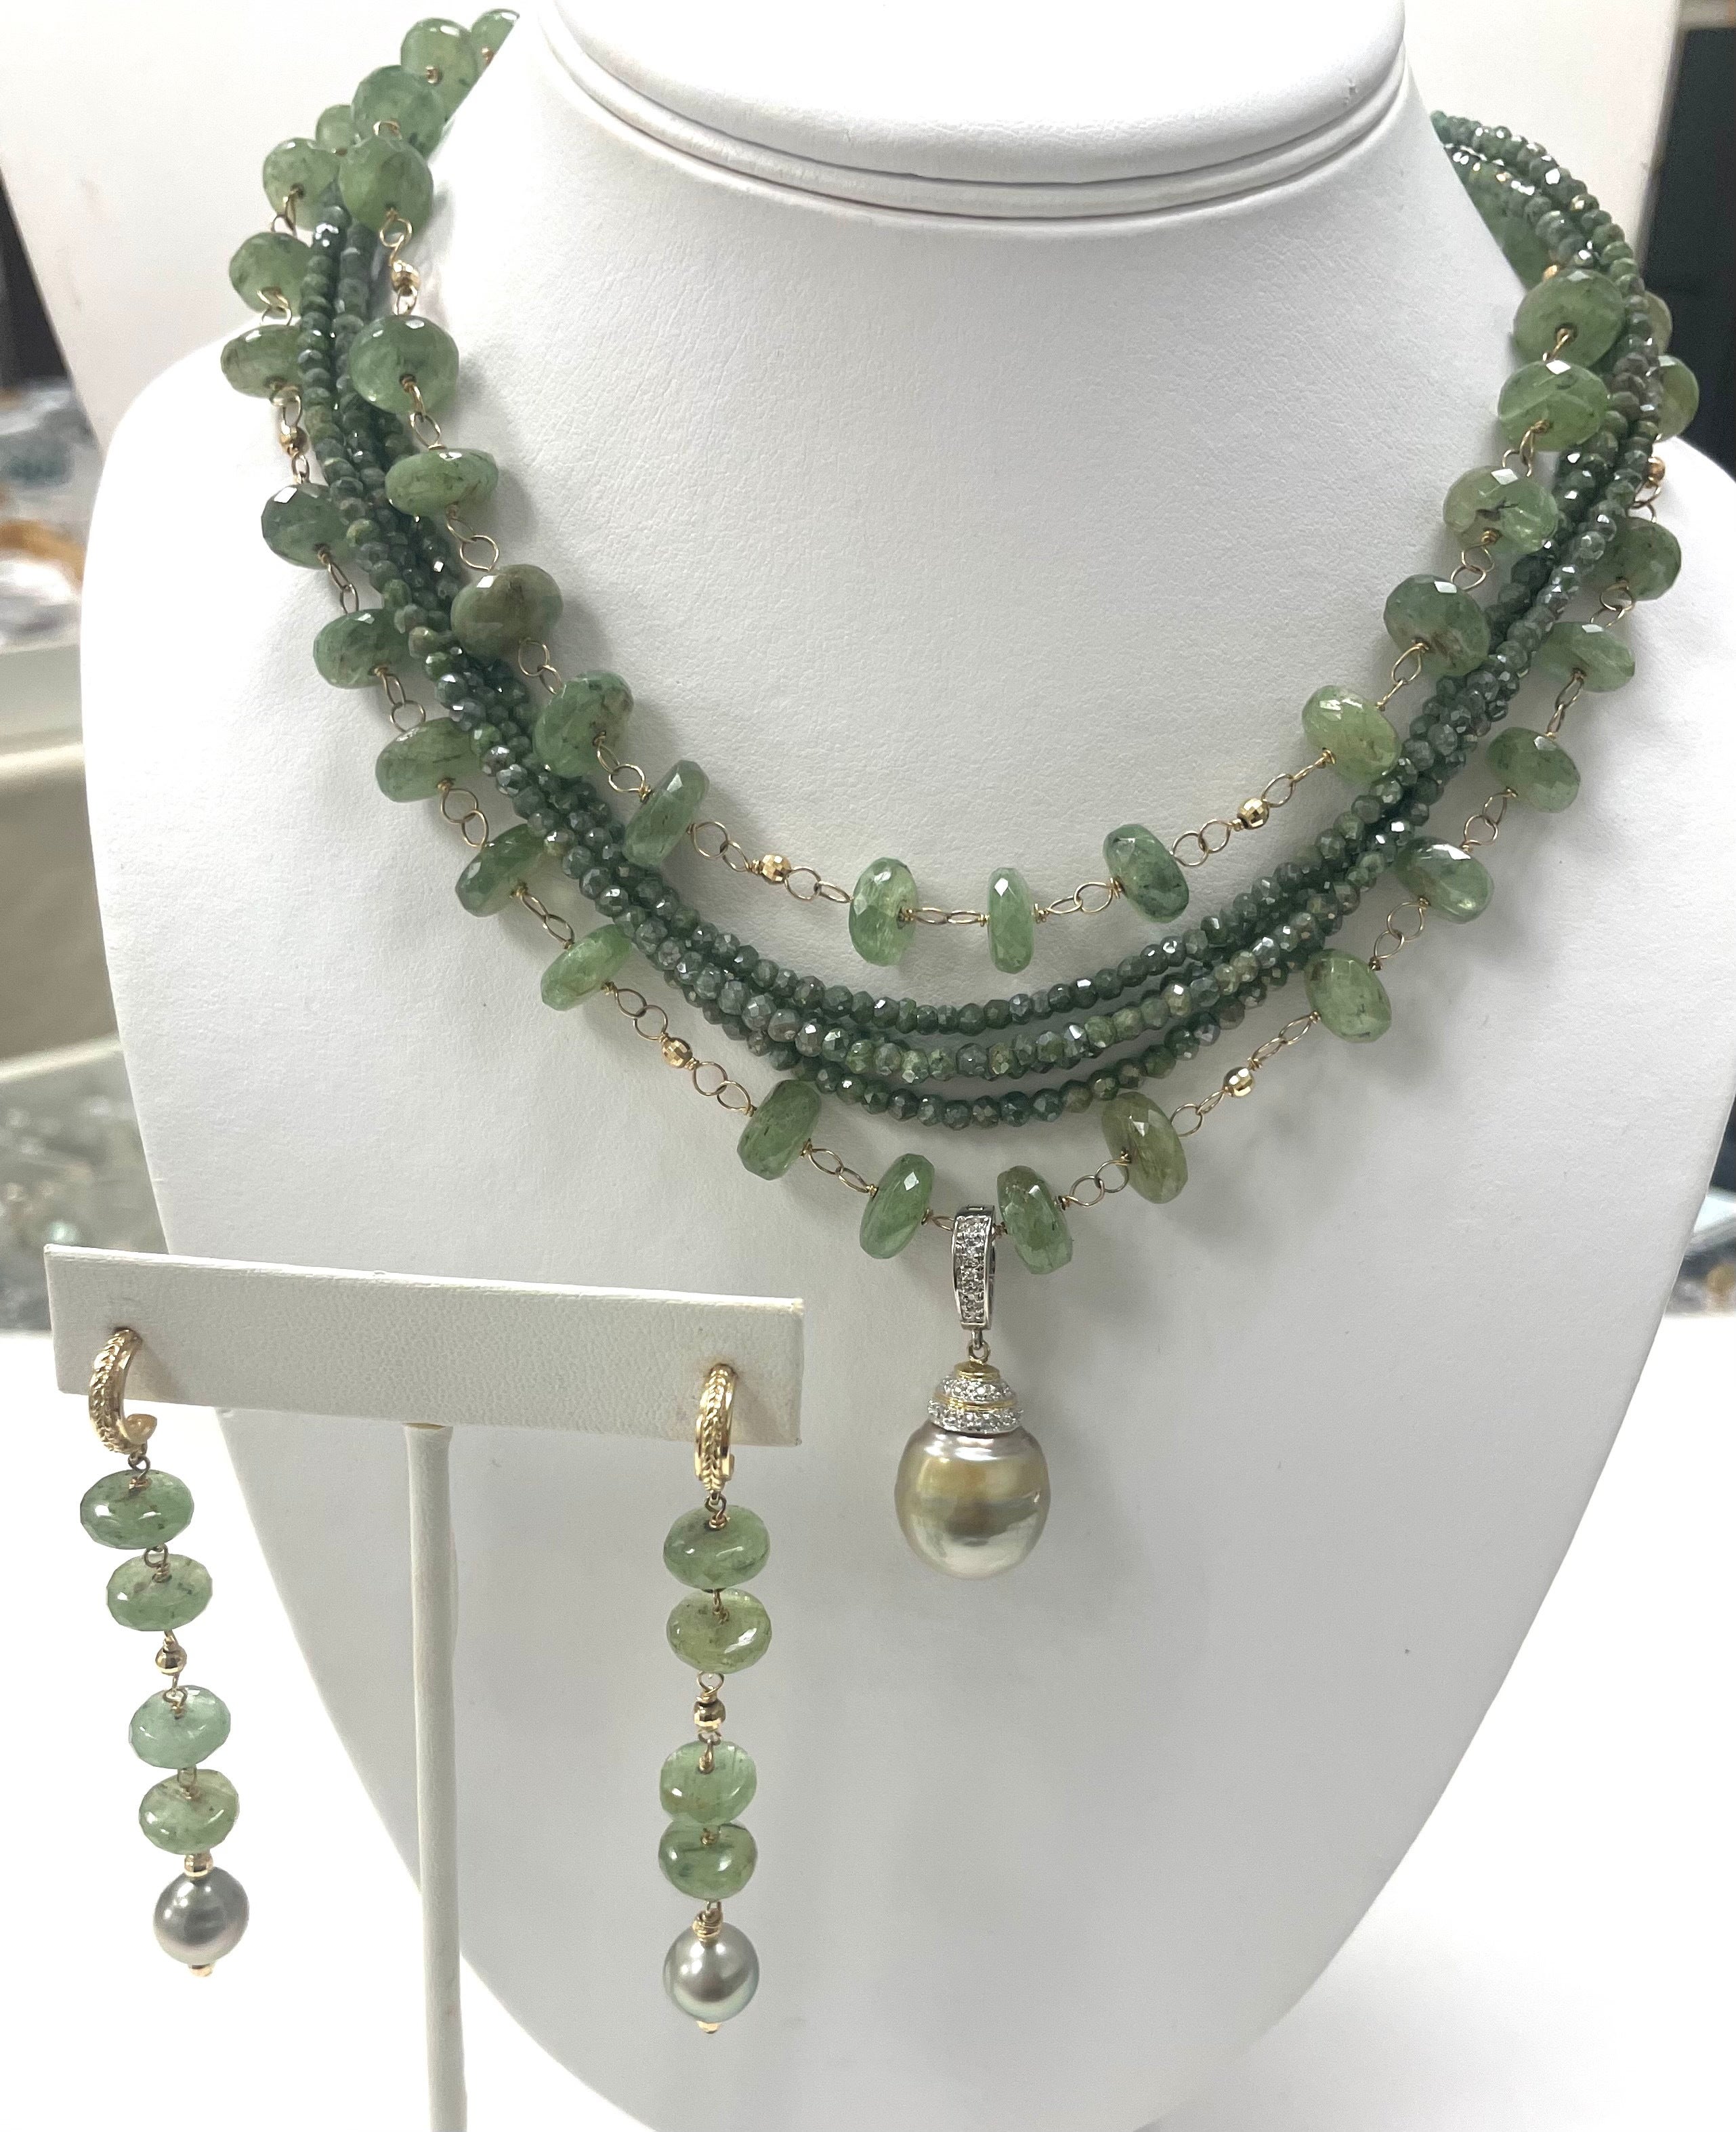 Description
Rare Green Kyanite paired with lustrous Pistachio color Tahitian pearls. Item #E3373
A beautiful necklace was designed to match these earrings (see photos), Item # N3788 $12,500). Sold separately.

Materials and Weight
Green Kyanite, 34